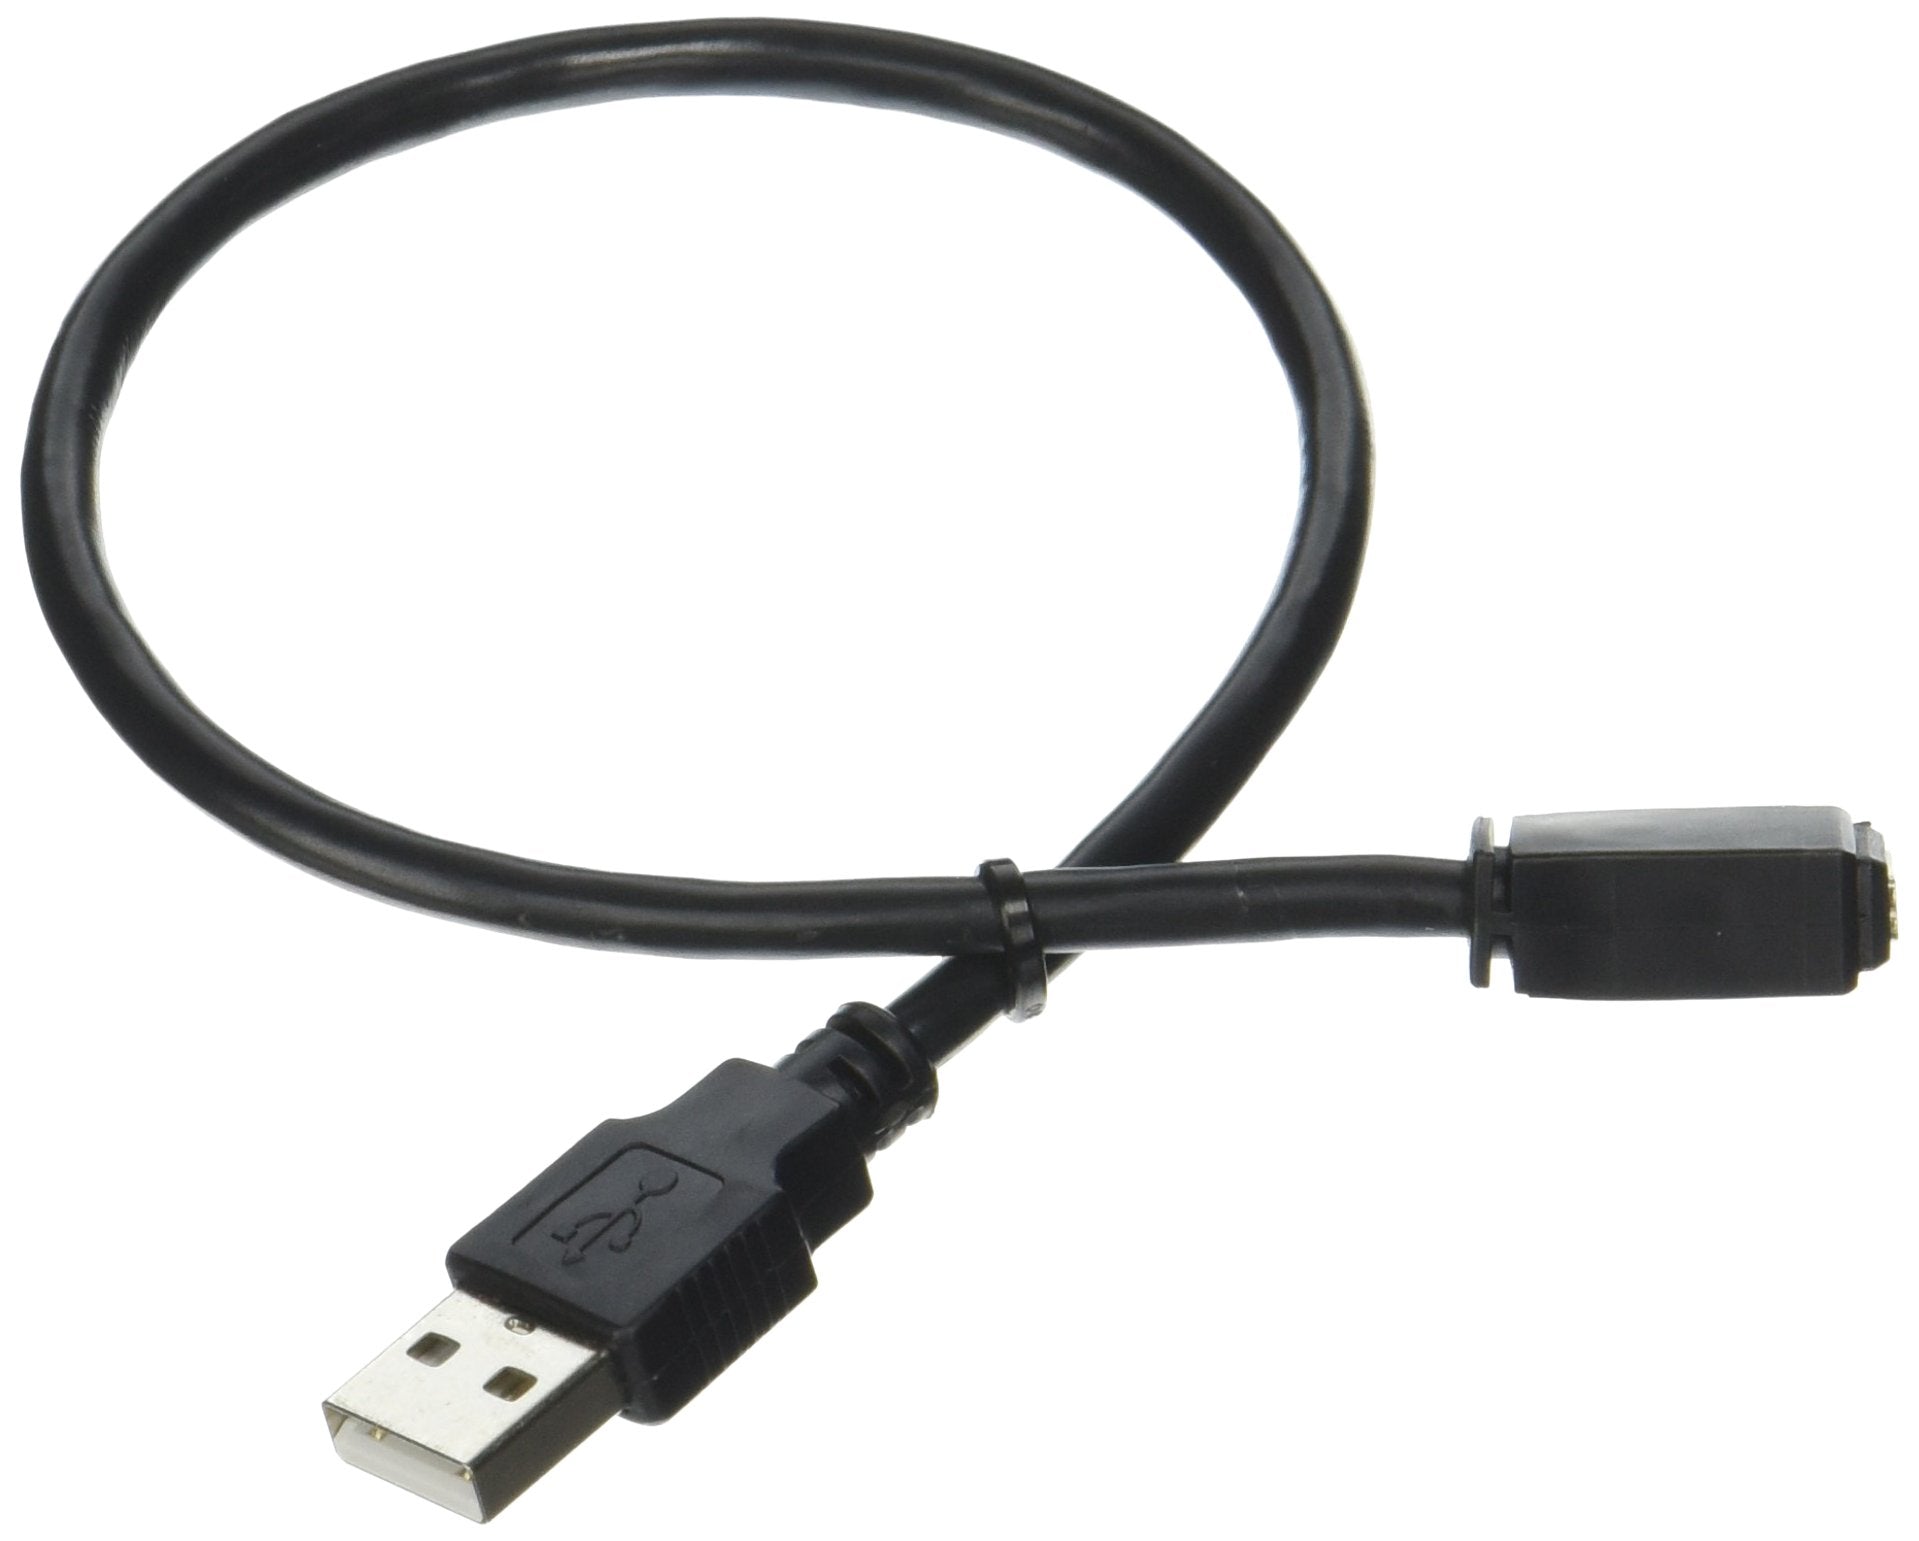 PAC USB-GM1 OEM USB Port Retention Cable for Select GM and Chrysler Vehicles